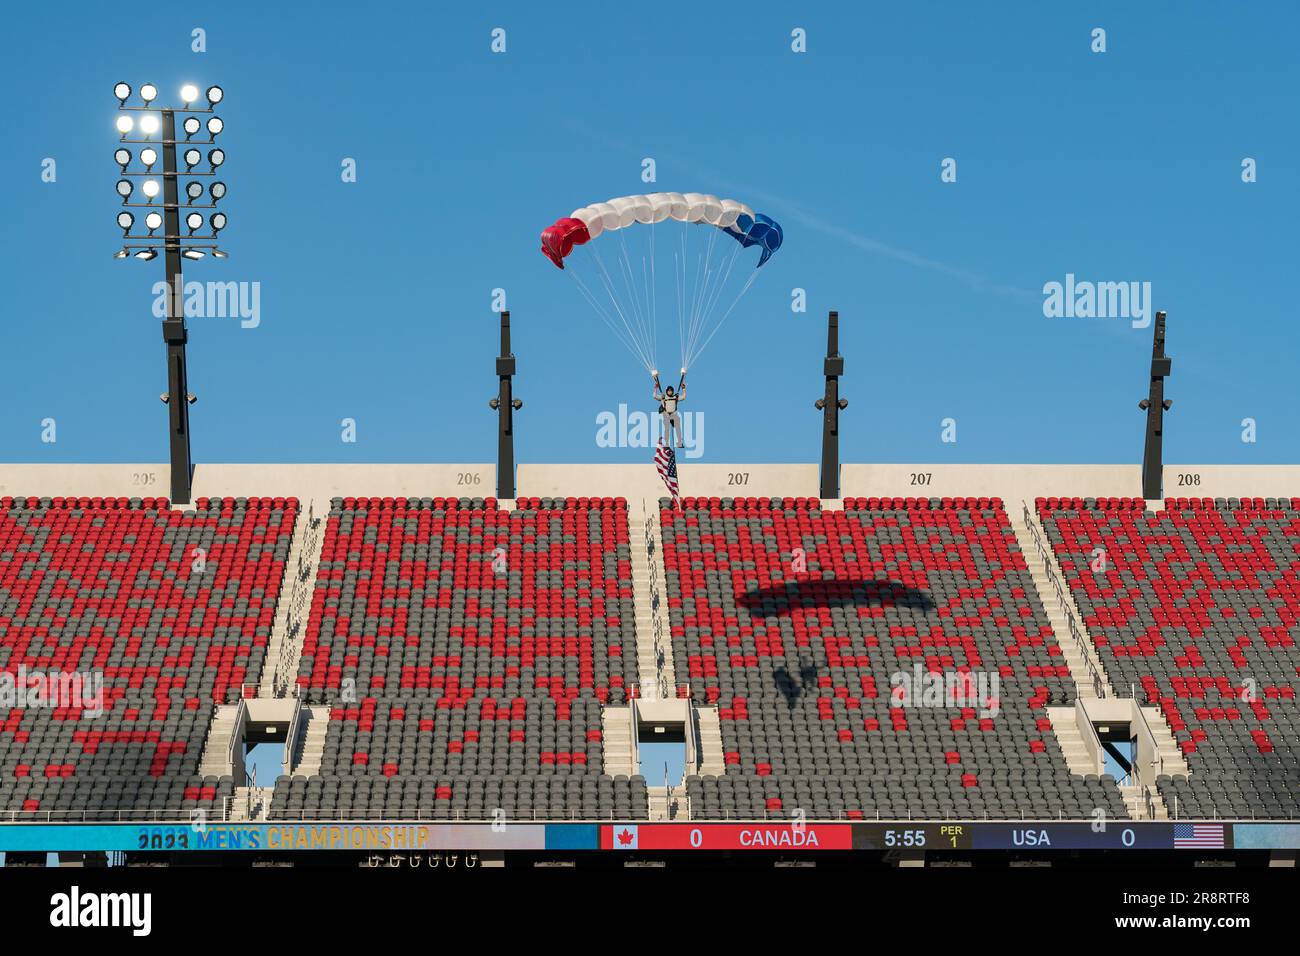 San Diego, USA. 21st June, 2023. A parachuter arrives on the field before the start of the World Lacrosse Men's Championship opening game USA vs Canada at Snapdragon Stadium. Credit: Ben Nichols/Alamy Live News Stock Photo